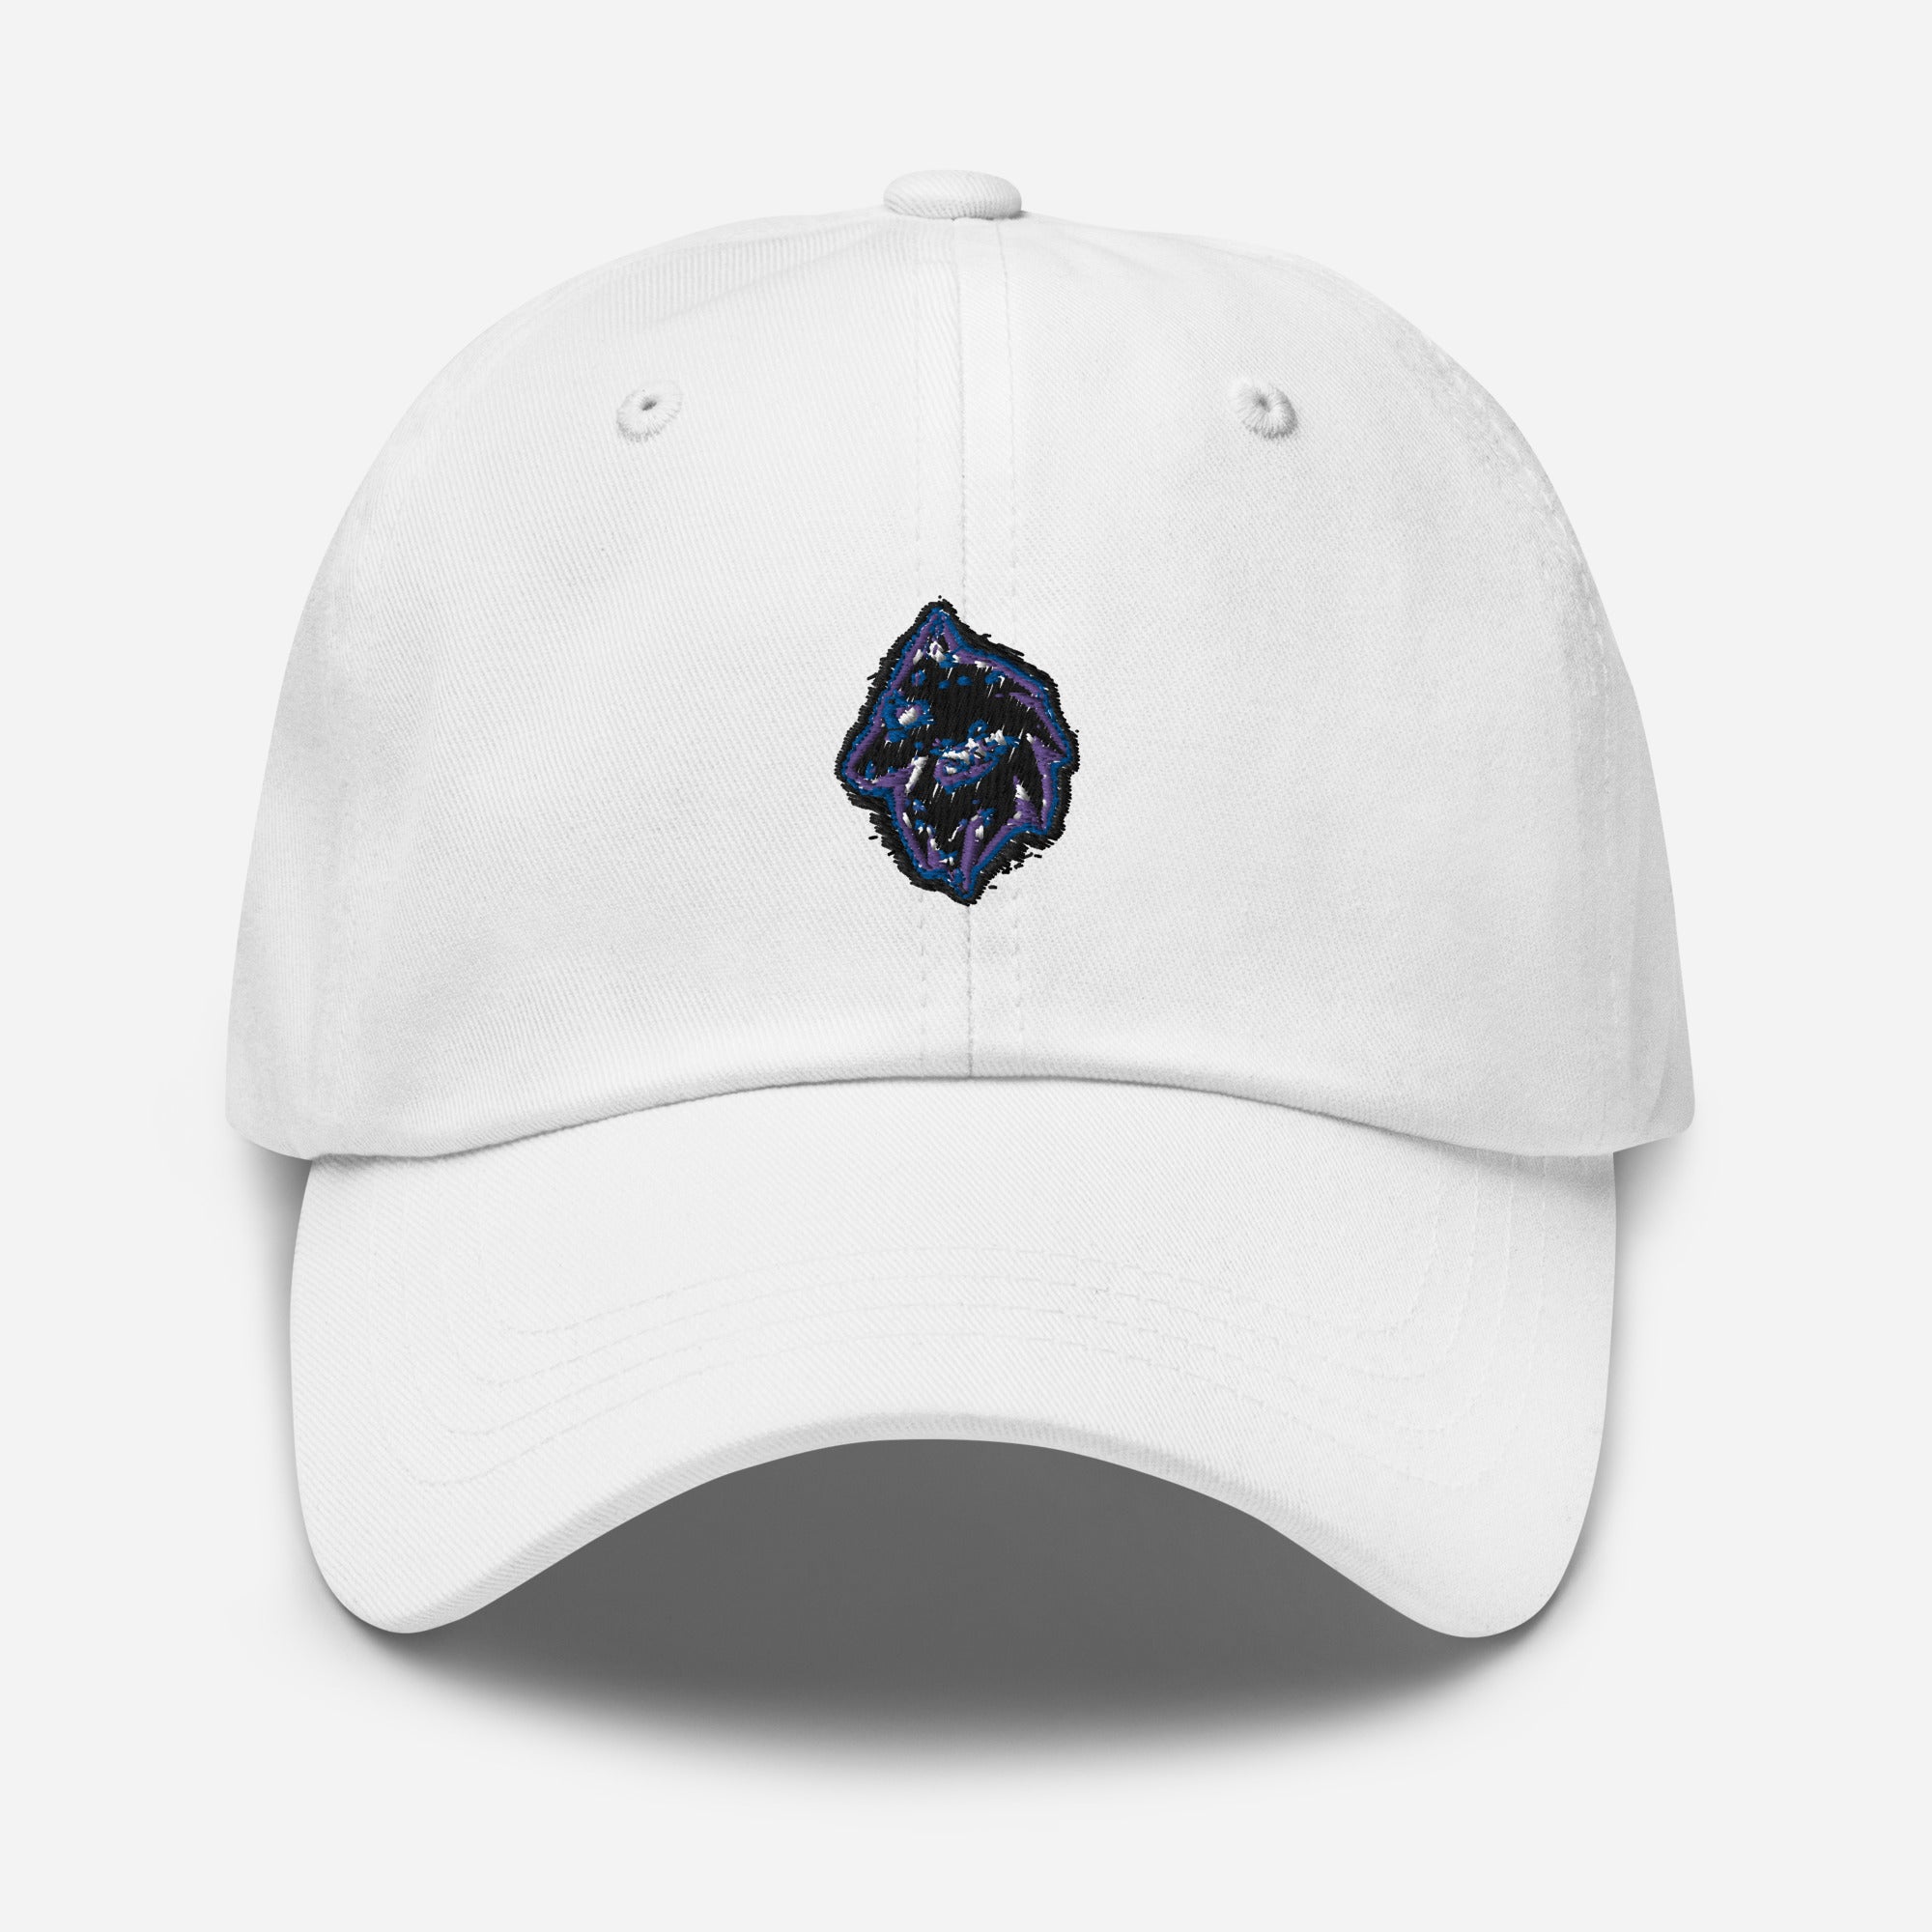 shc Embroidered Dad hat